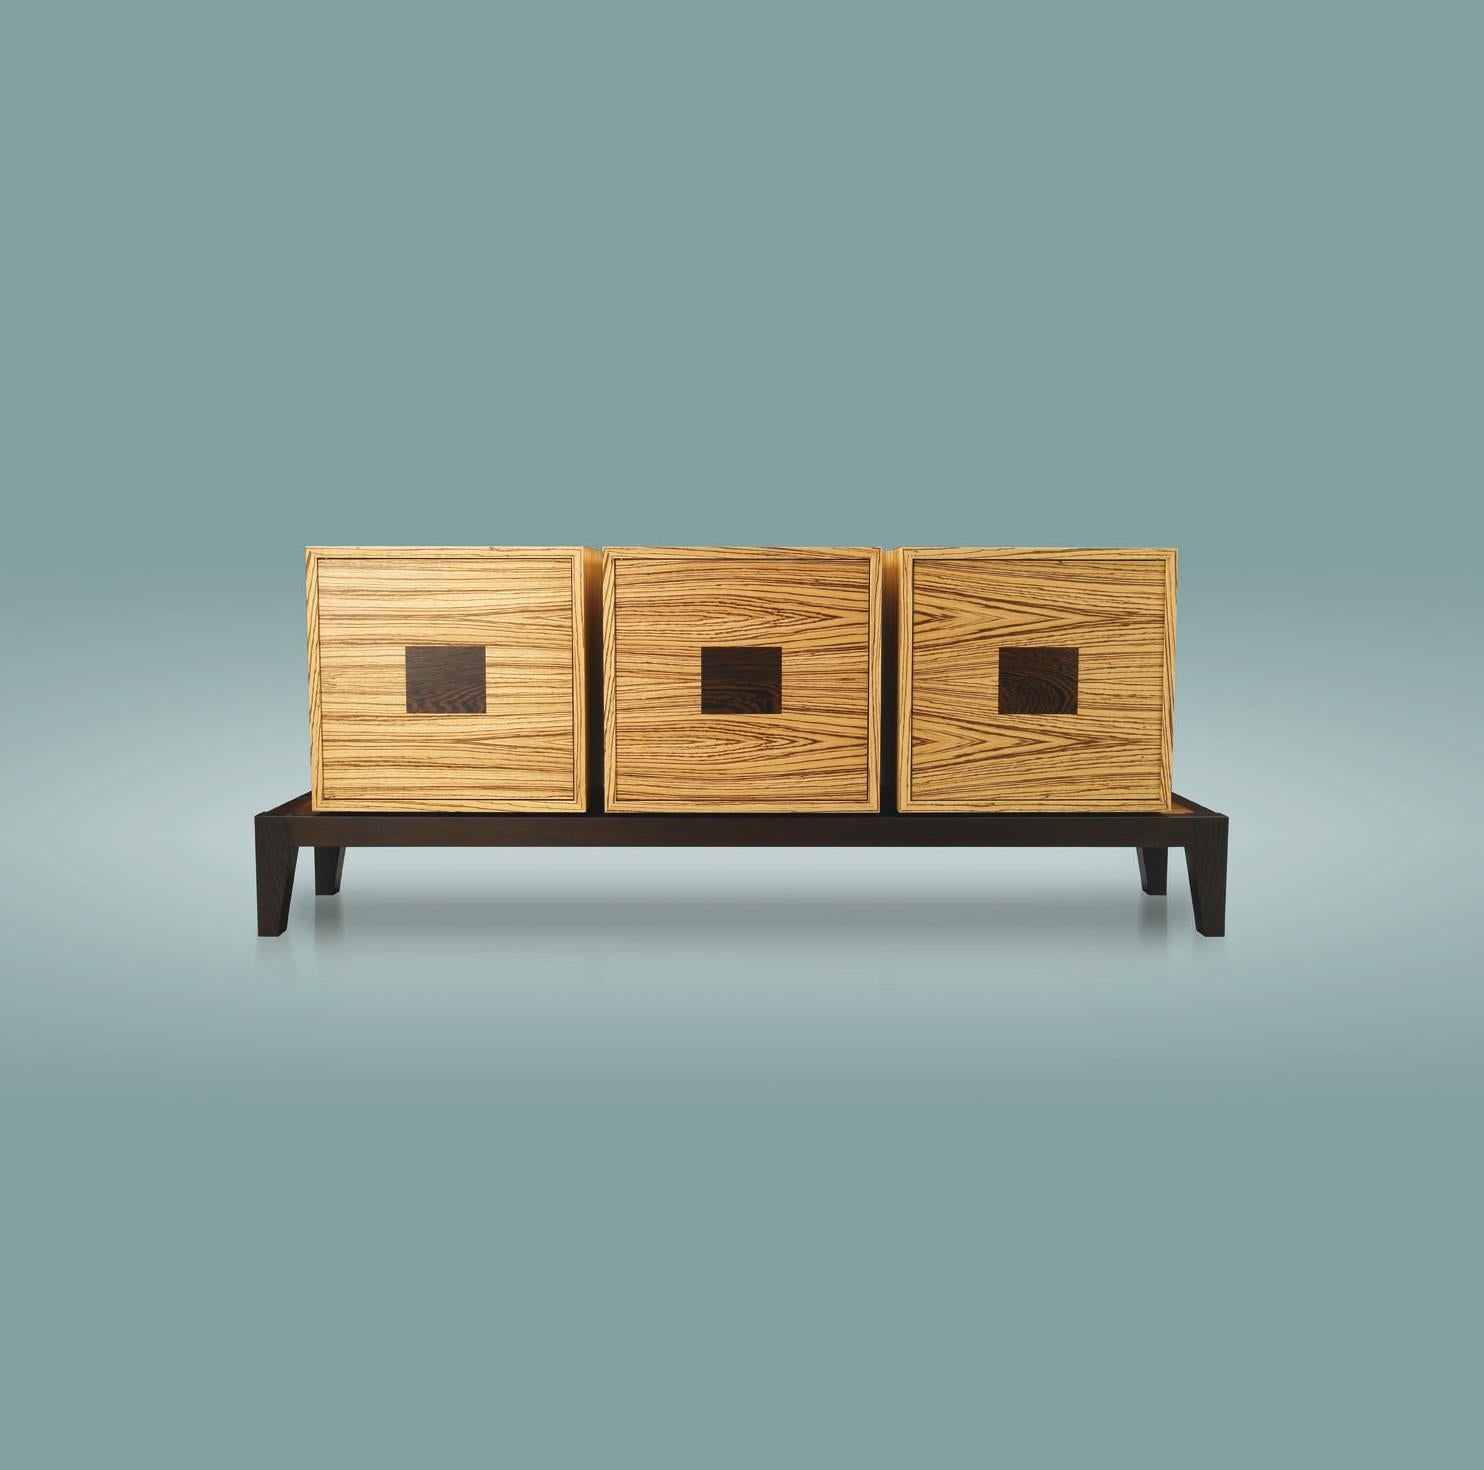 This box sideboard combines the breaking strength of its three boxes and the delicacy of its Japanese-style base. The dual colors of zebrano and wenge reinforce this beautiful marriage of formal oppositions. A stripped-down and modern composition